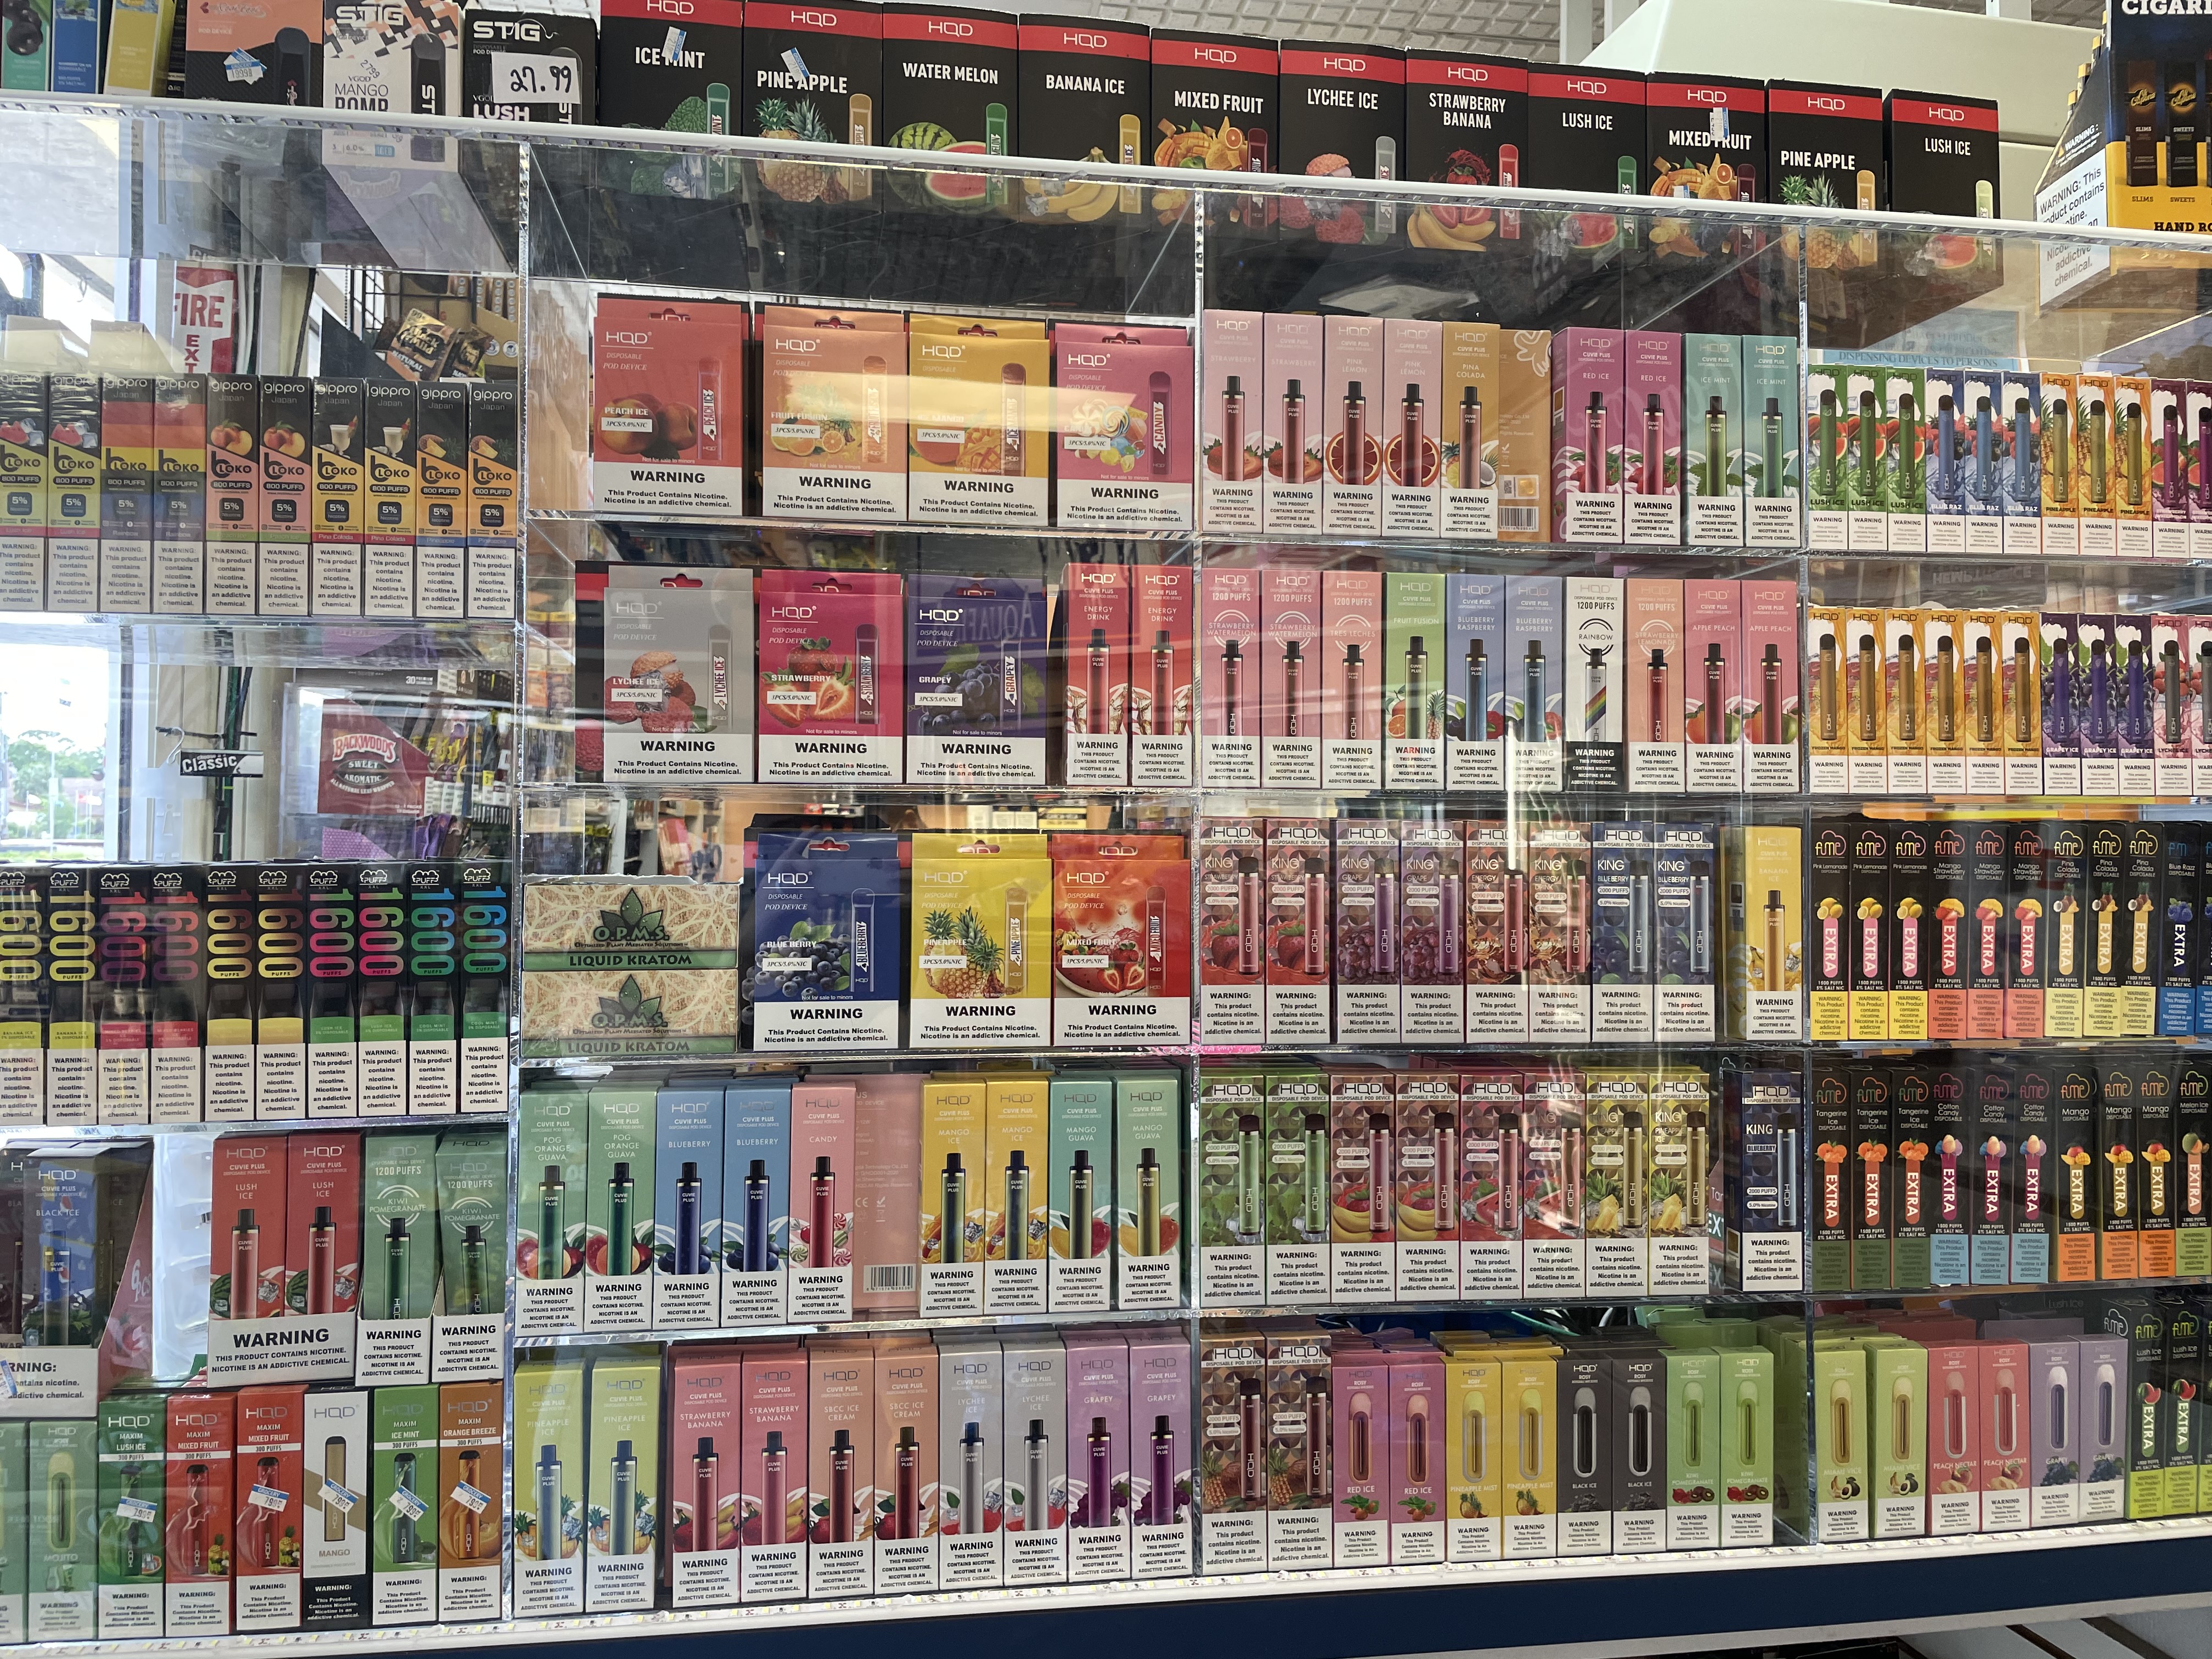 wall display of flavored disposable e-cigarettes 